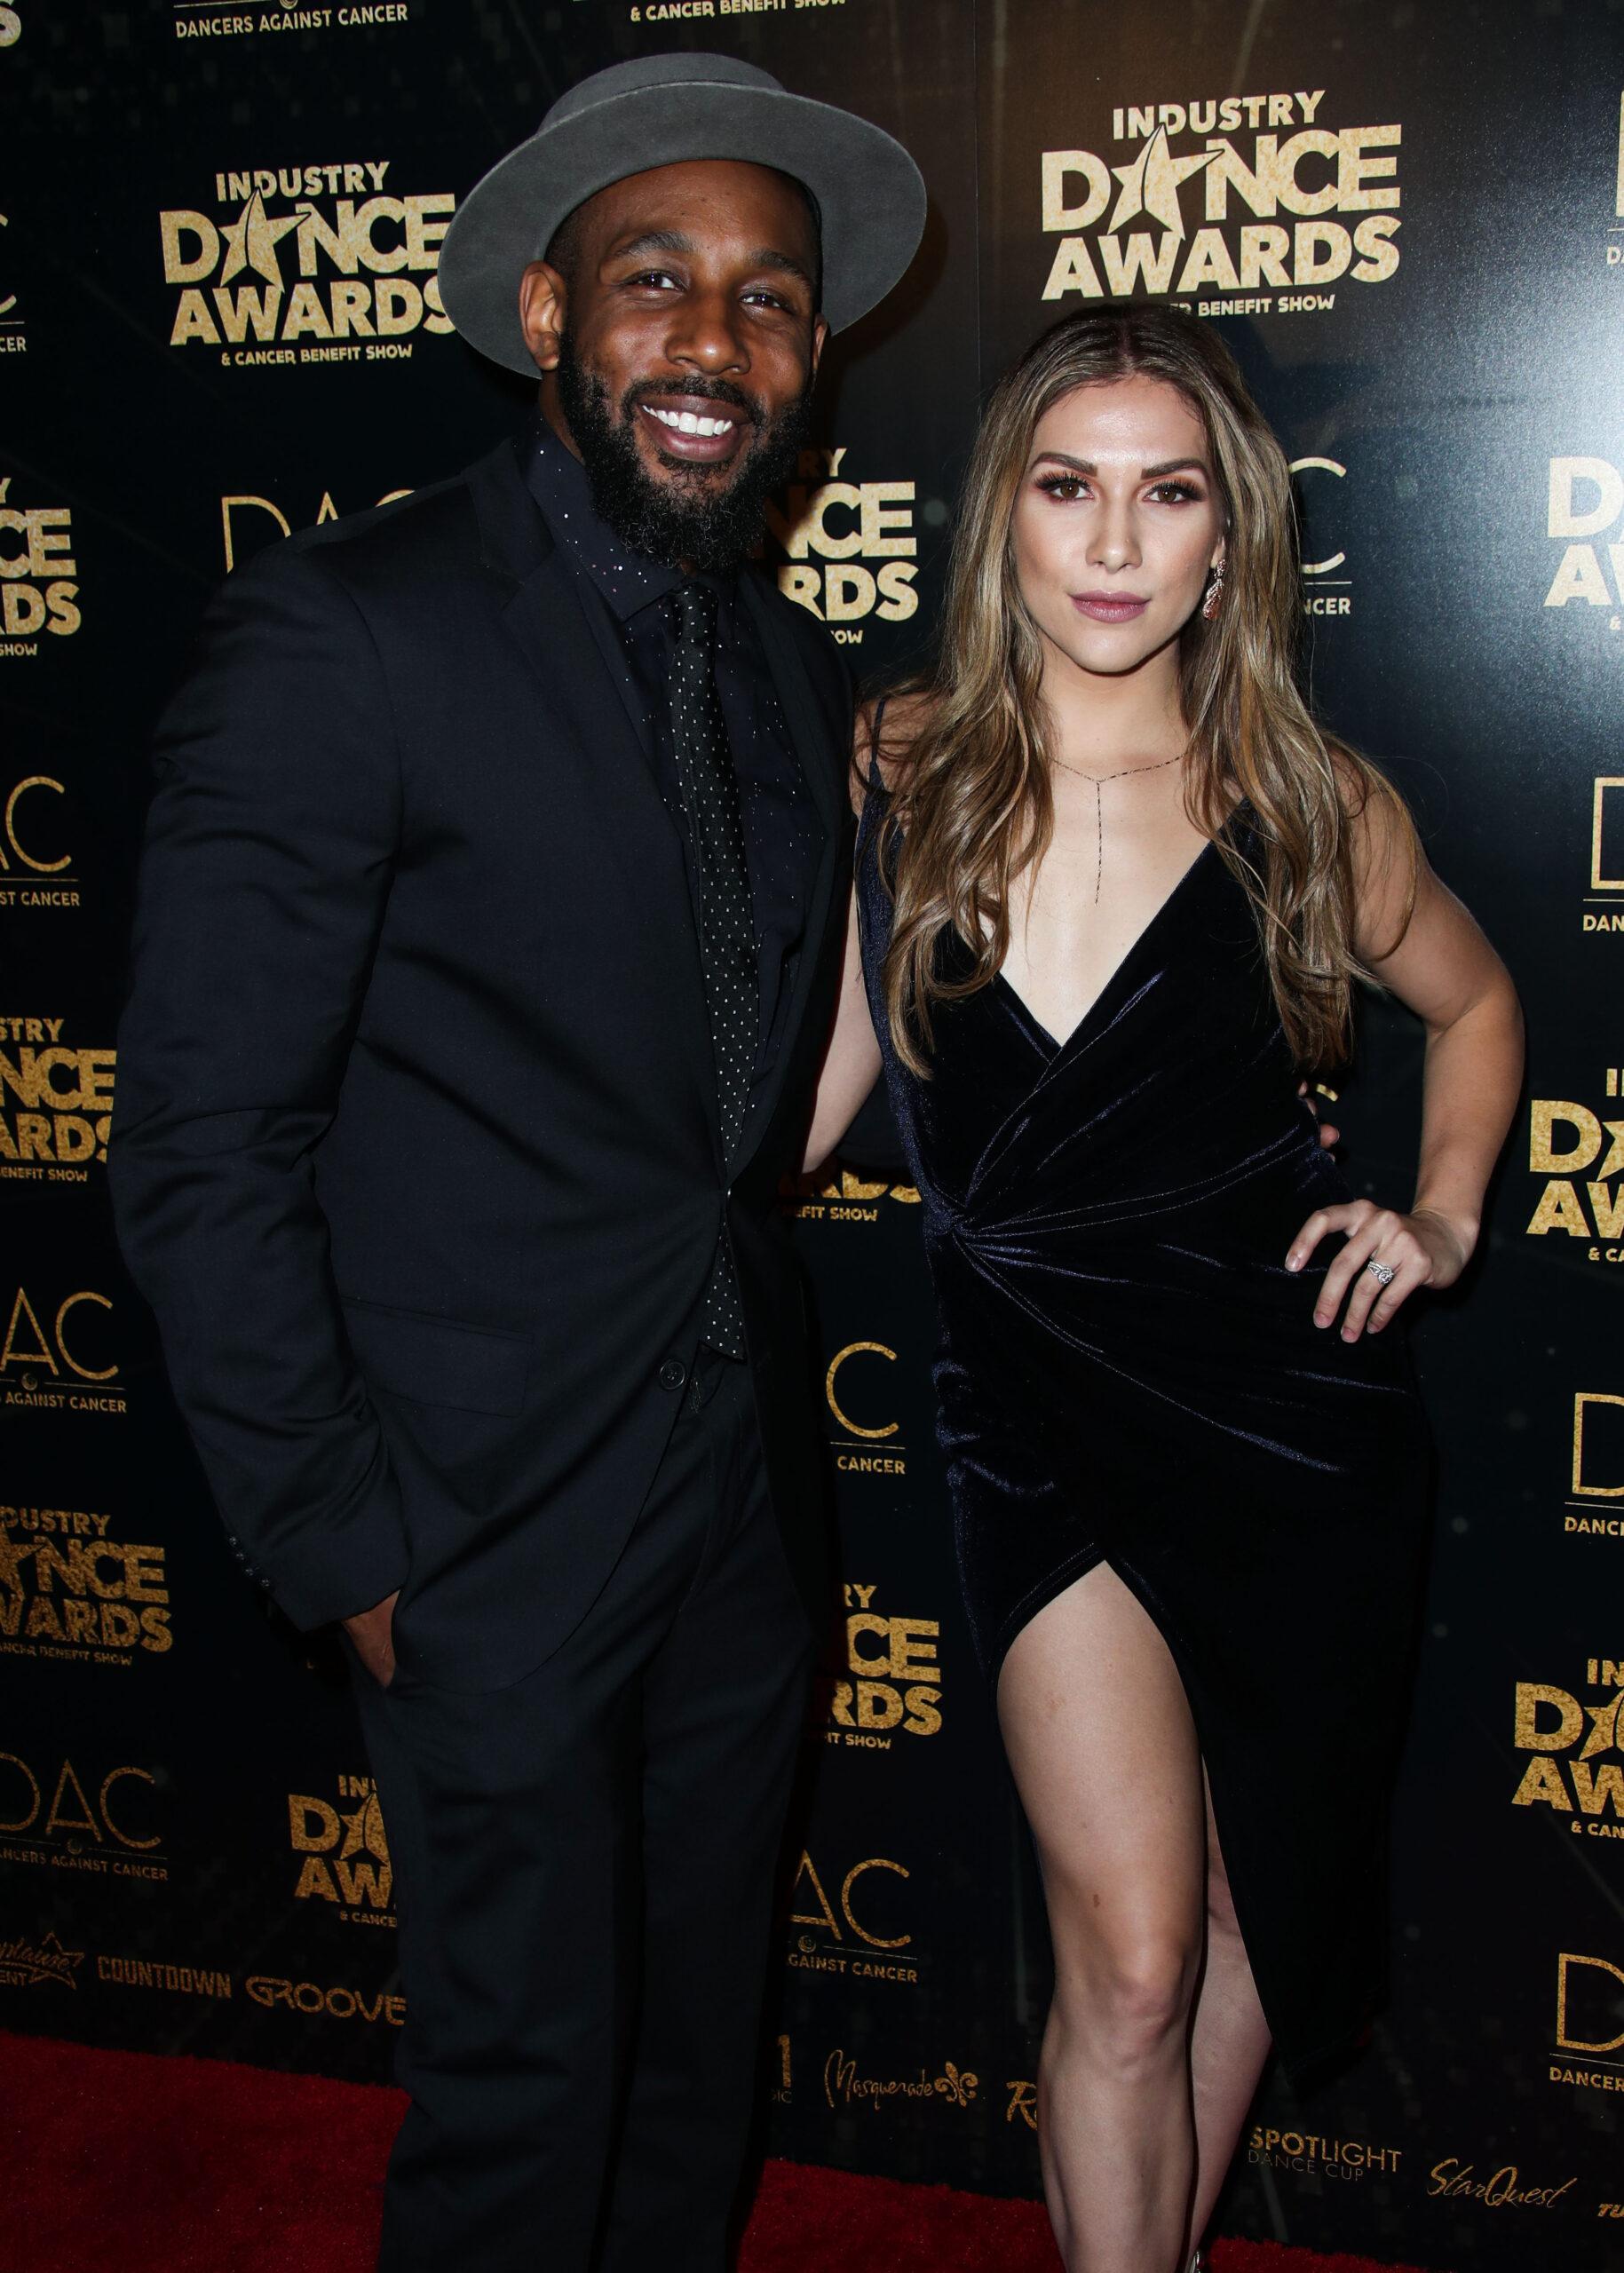 Stephen 'tWitch' Boss & Allison Holker at the 2018 Industry Dance Awards